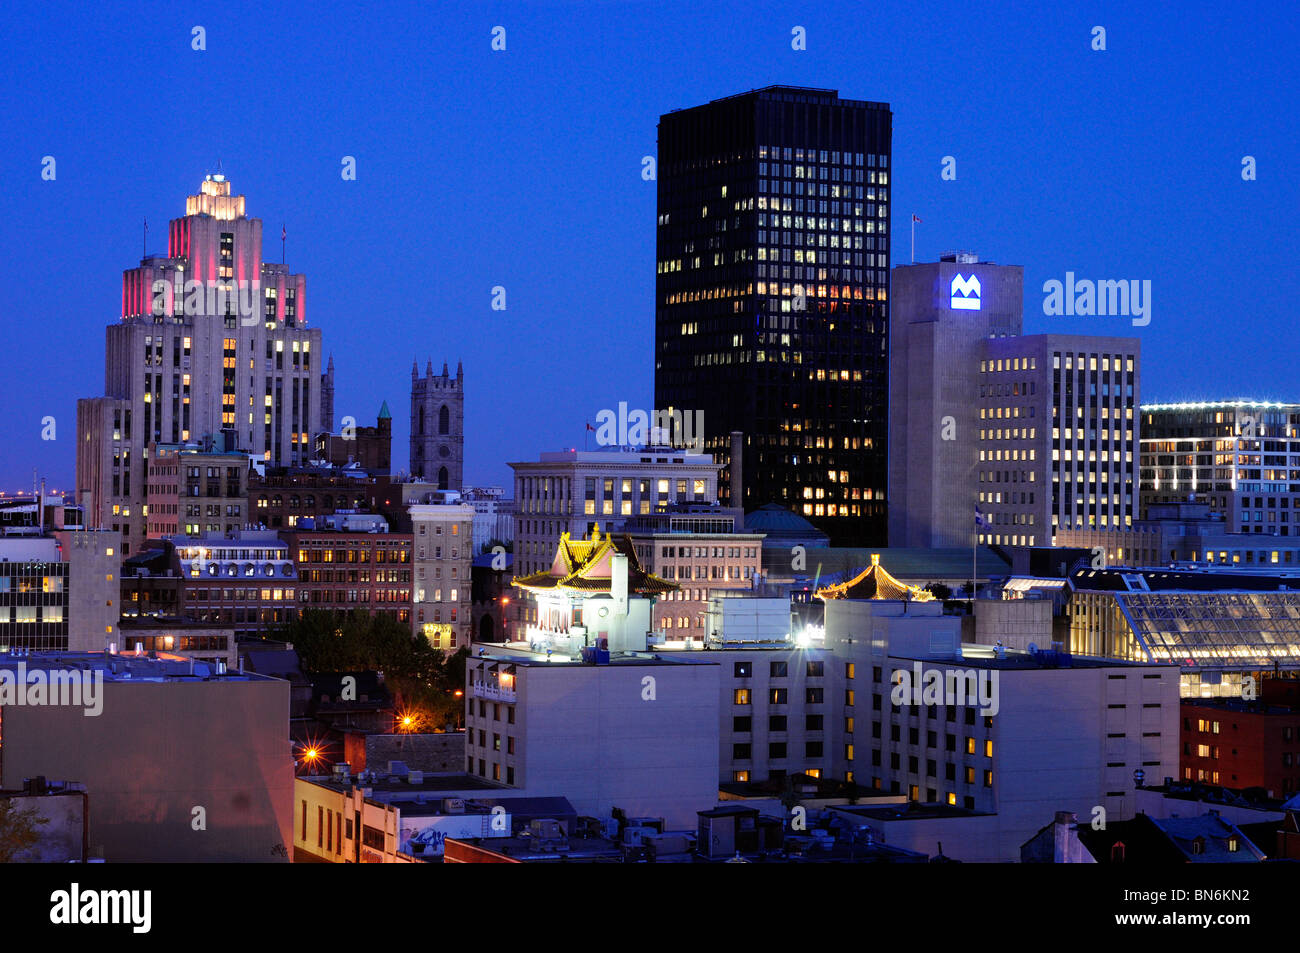 Blue Hour Night Time In Montreal, Quebec, Canada Stock Photo - Alamy